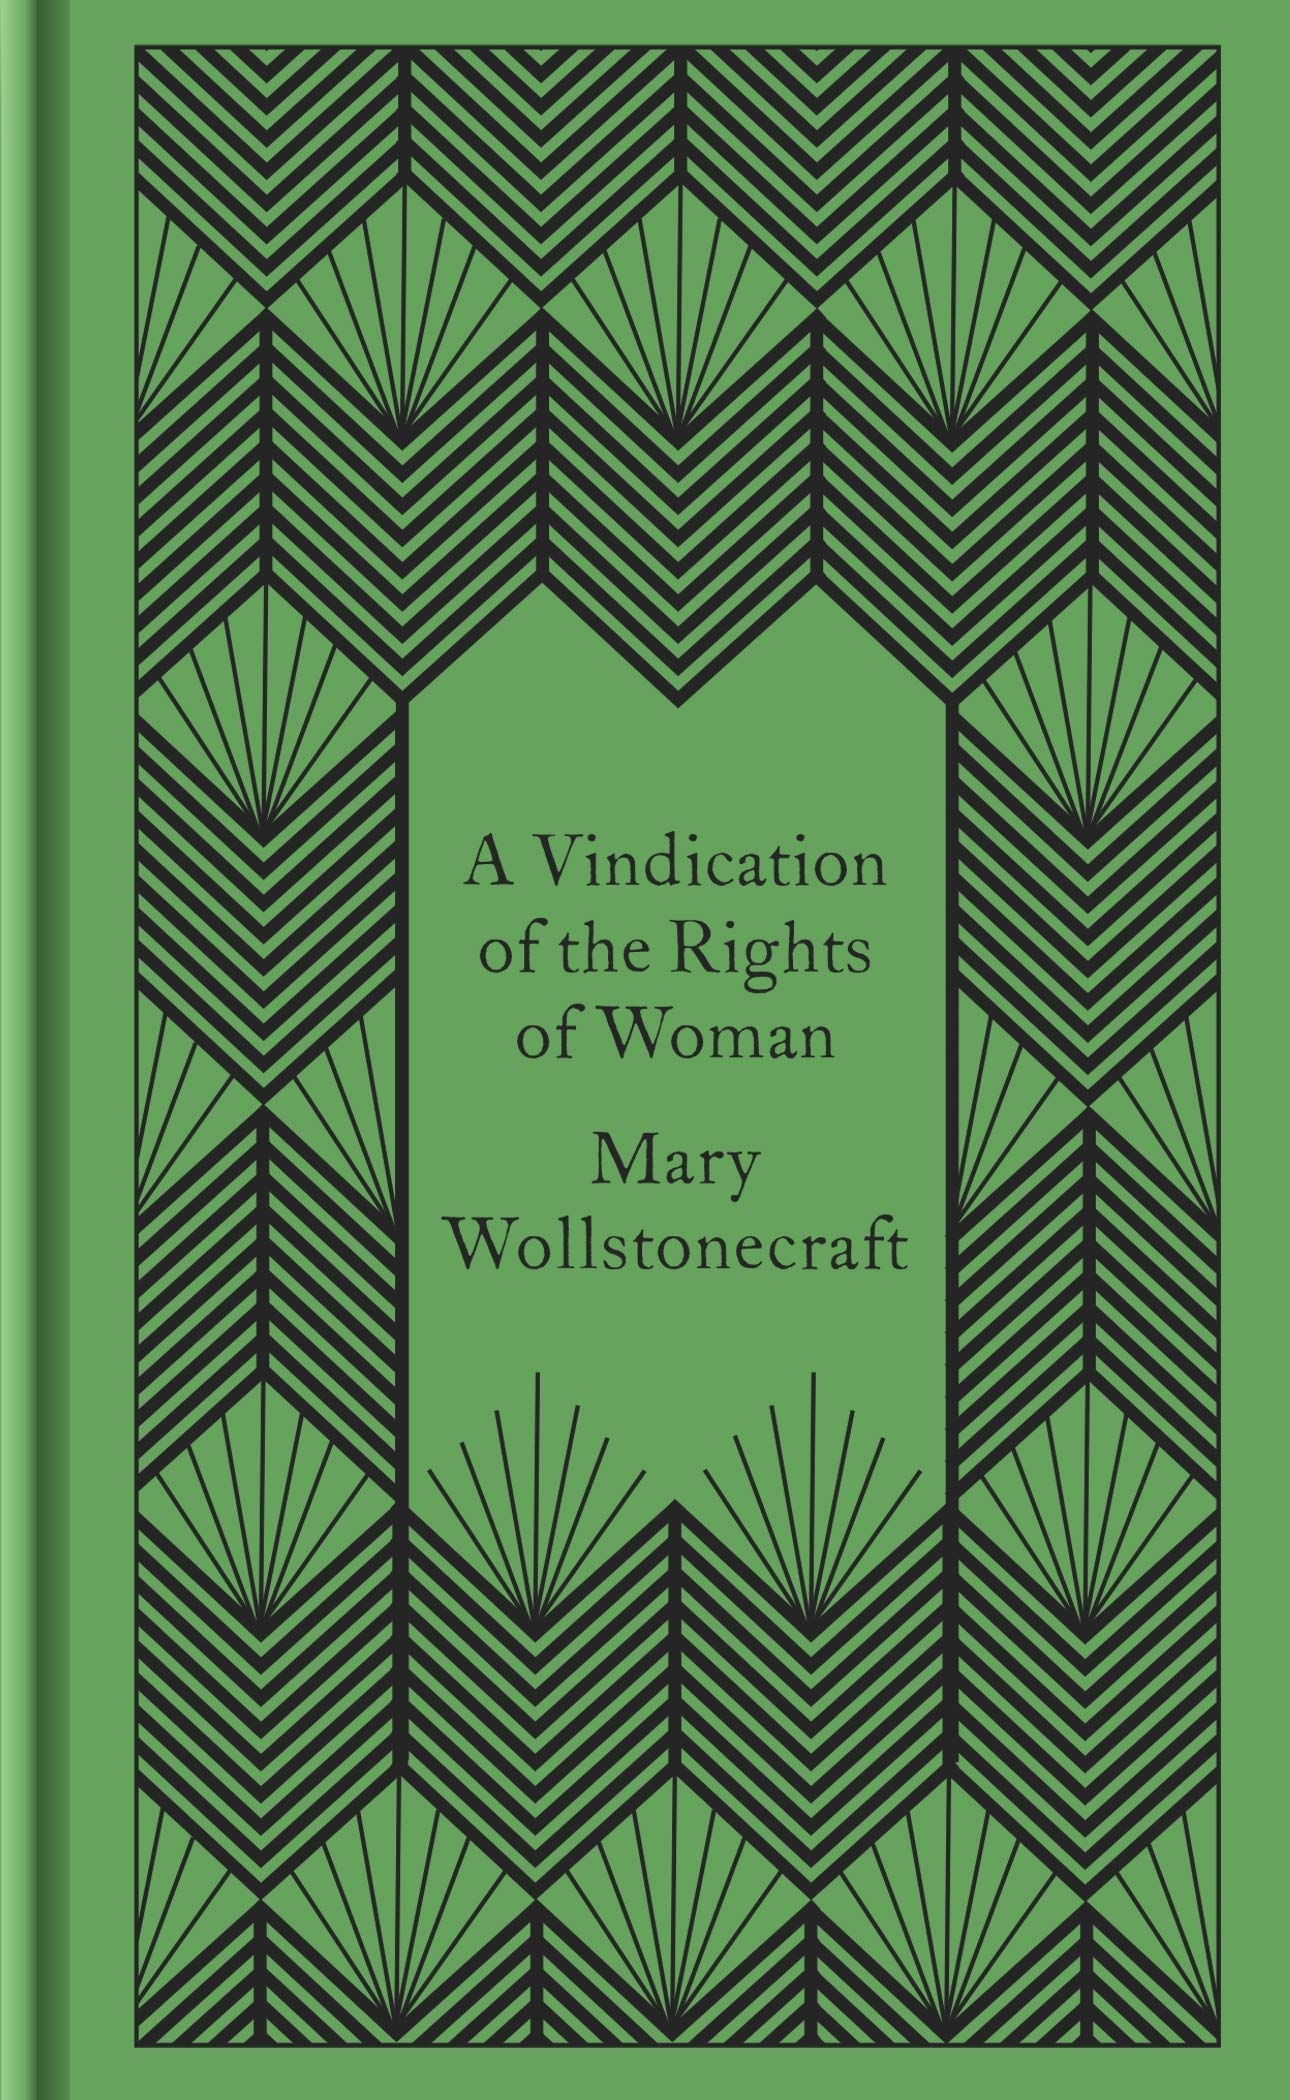 A Vindication of the Rights of Woman | Mary Wollstonecraft